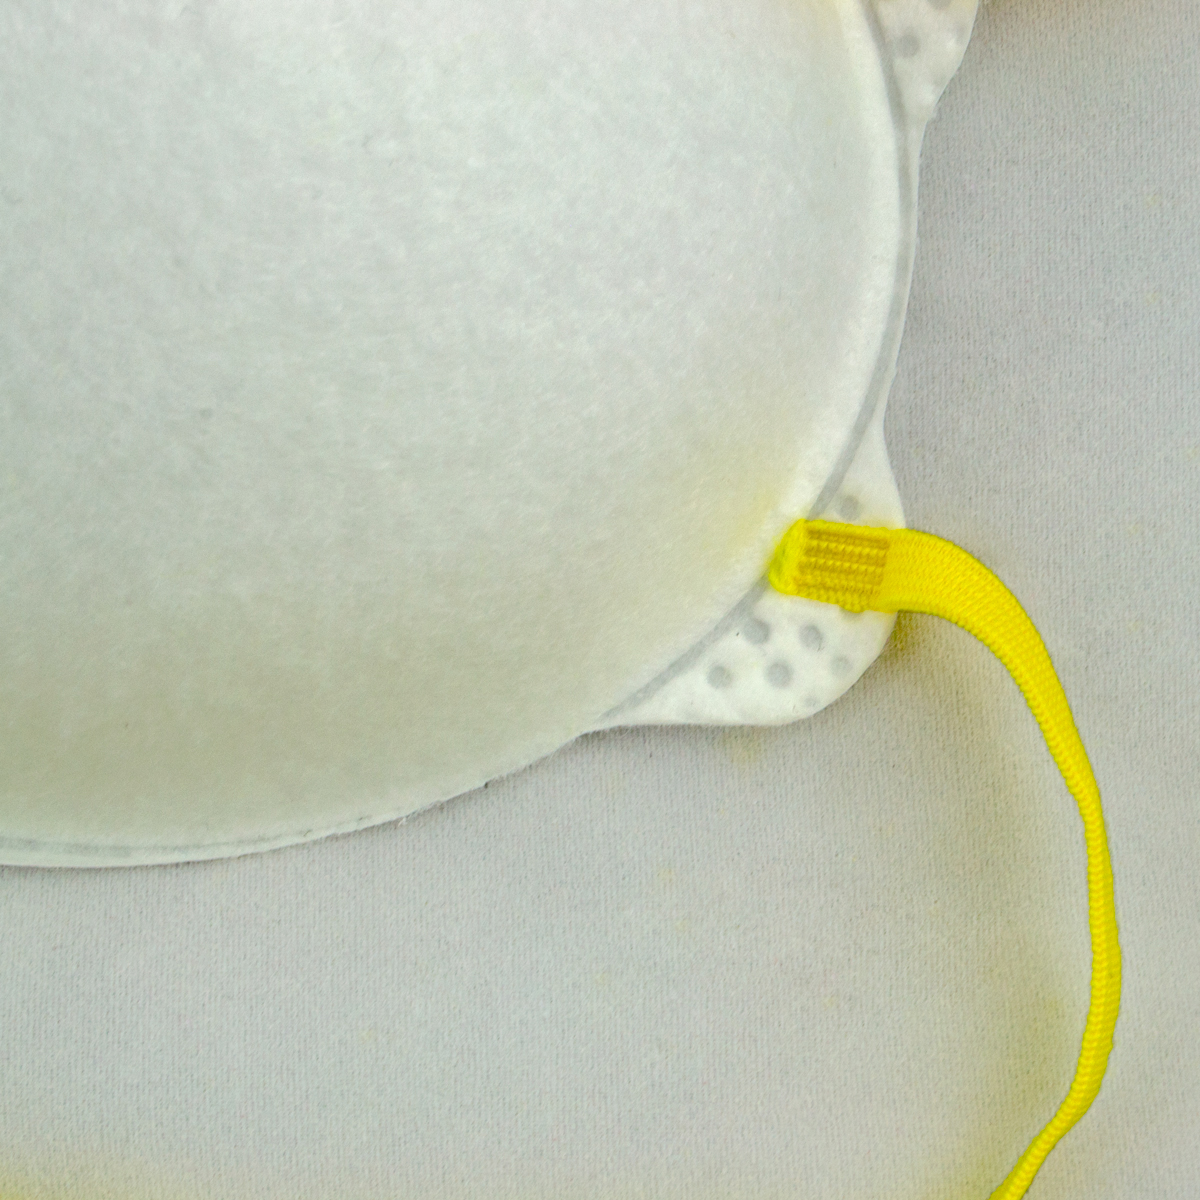 Cup Type Face Mask With Headloop